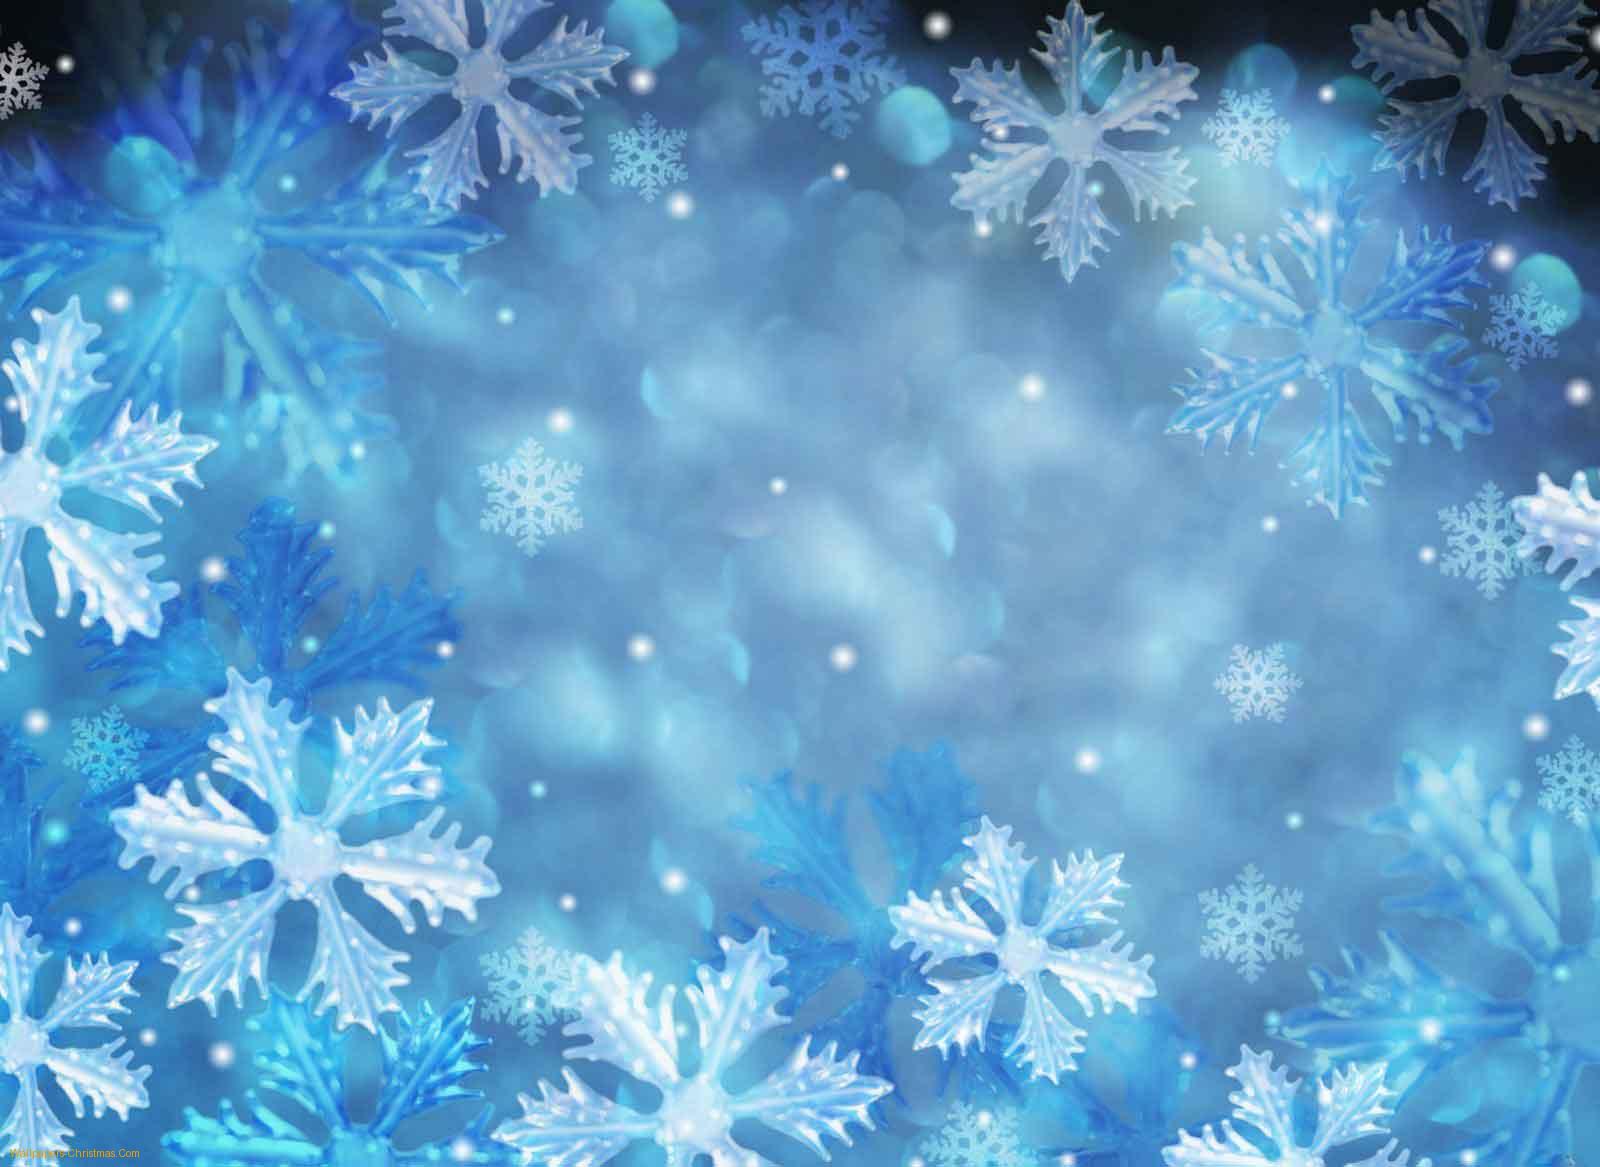 Christmas Snow Wallpaper 10479 Hd Wallpapers in Celebrations